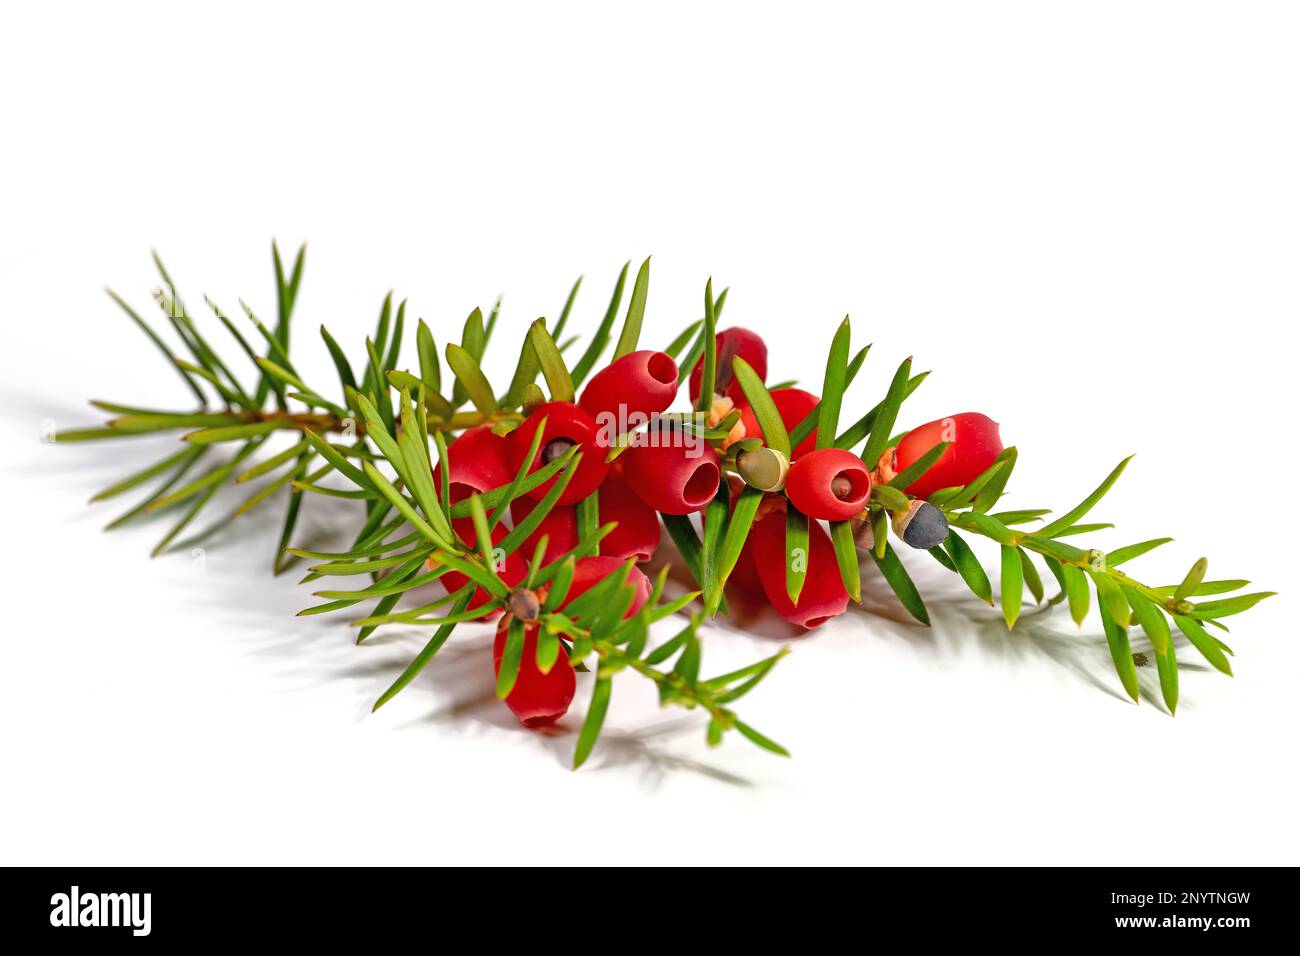 Fruits of the yew tree against a white background Stock Photo